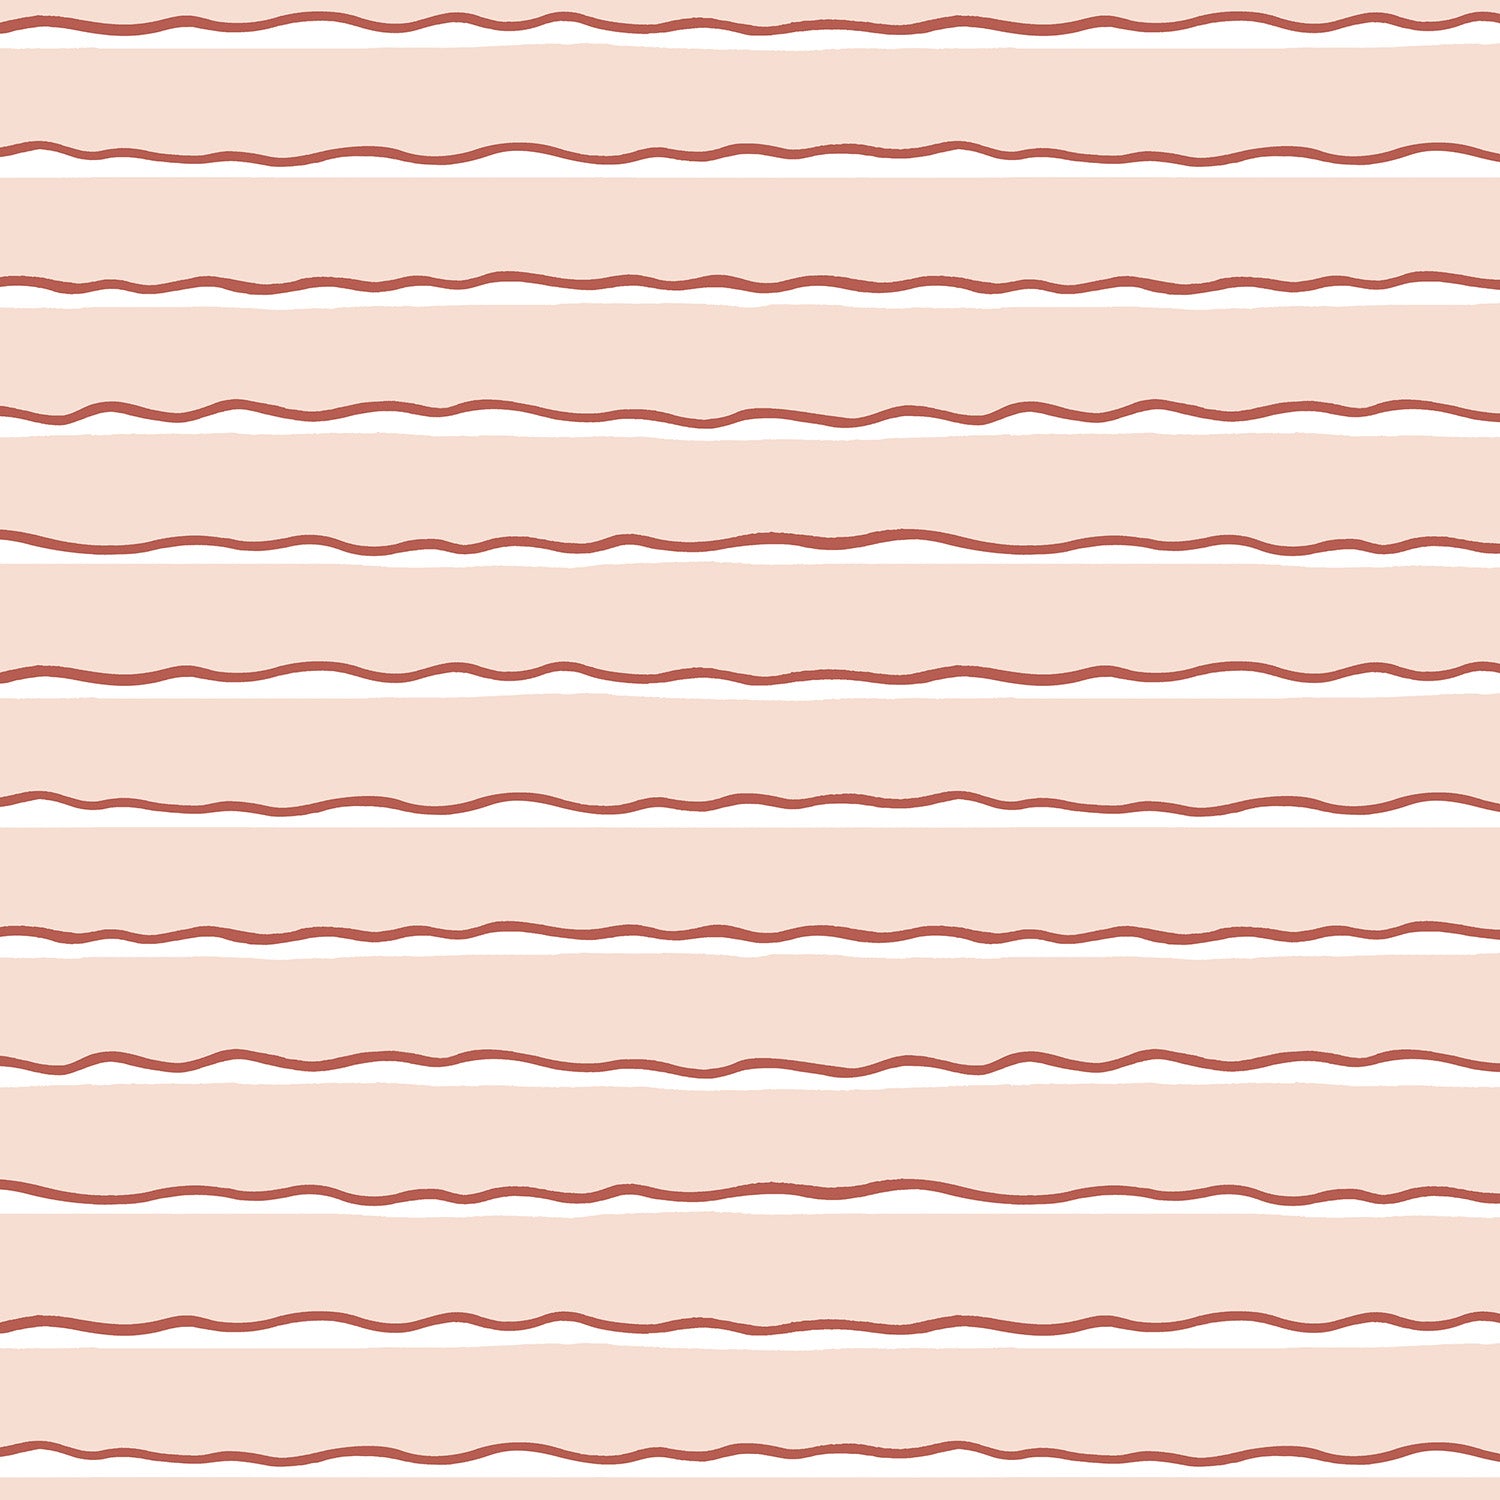 Detail of wallpaper in an undulating stripe pattern in pink, white and rust.